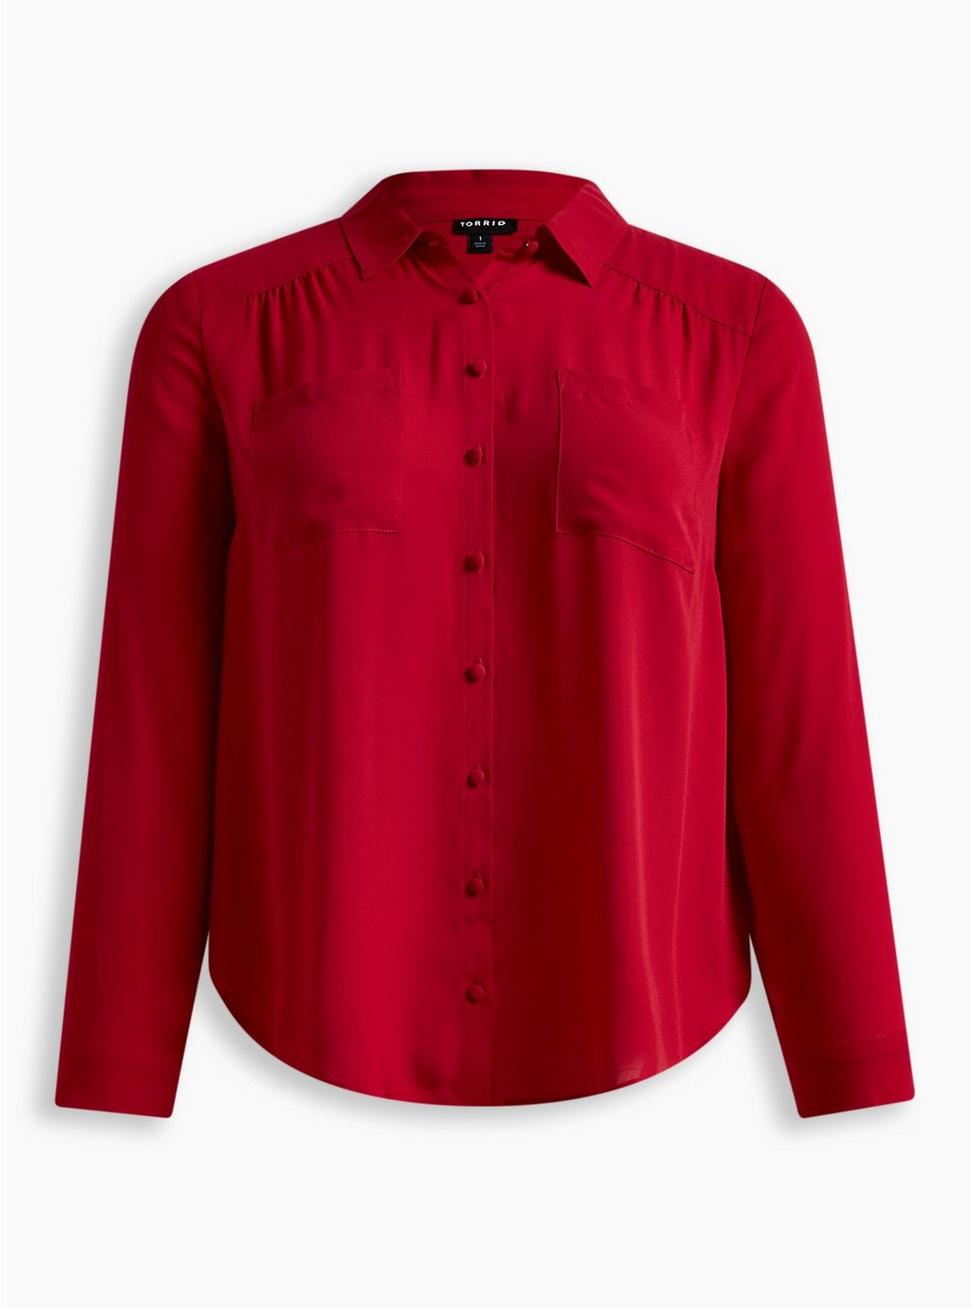 Madison Georgette Button-Up Long Sleeve Shirt, JESTER RED, hi-res